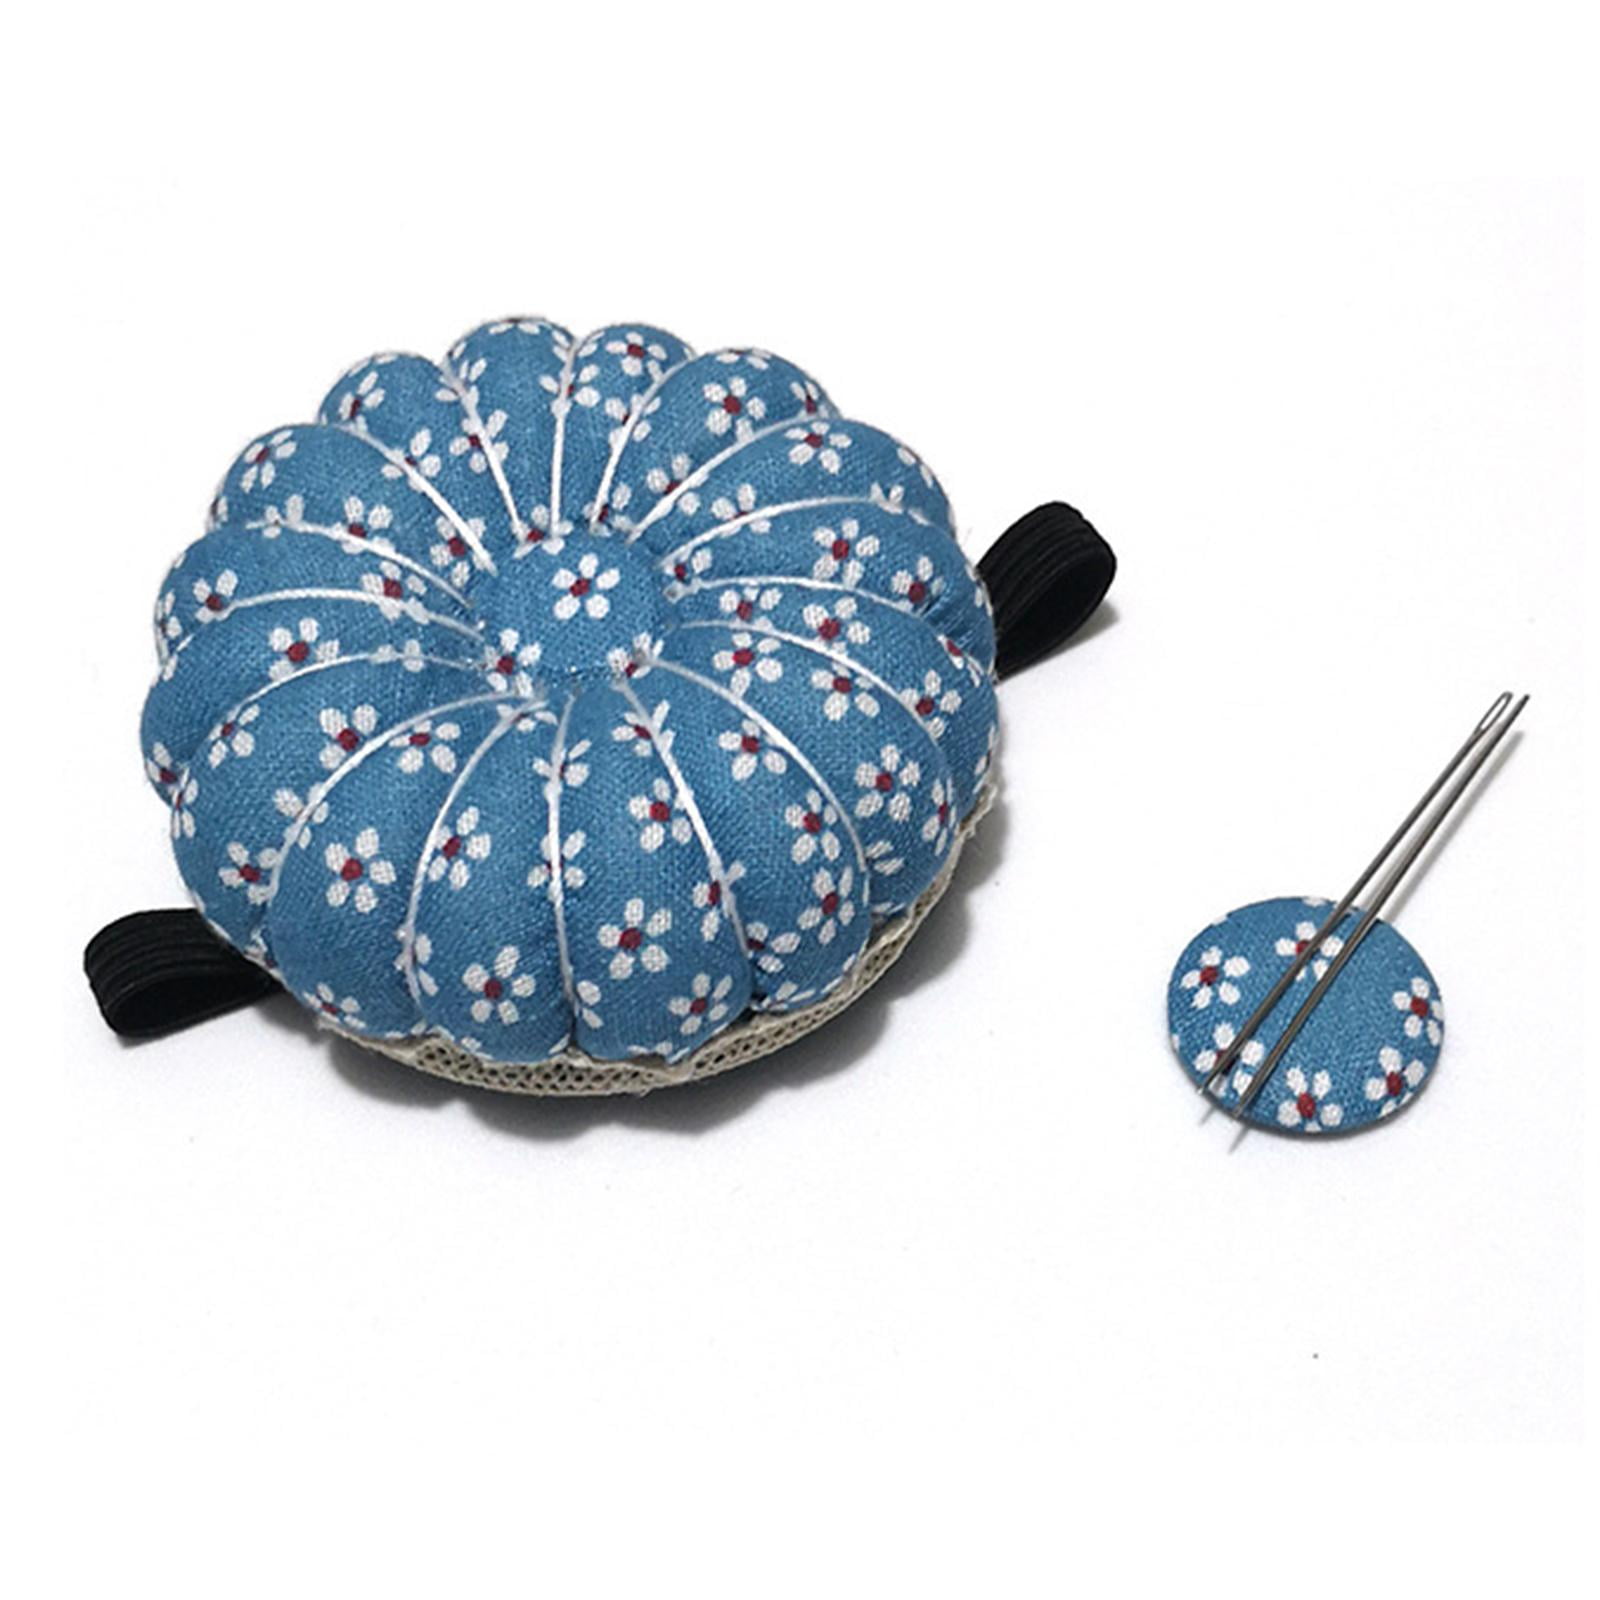 Pin Cushions - Wrist Pin Cushion for Sewing Pincushion with Soft Fabric, Pin  Patchwork Holder crafts & Sewing Blue 